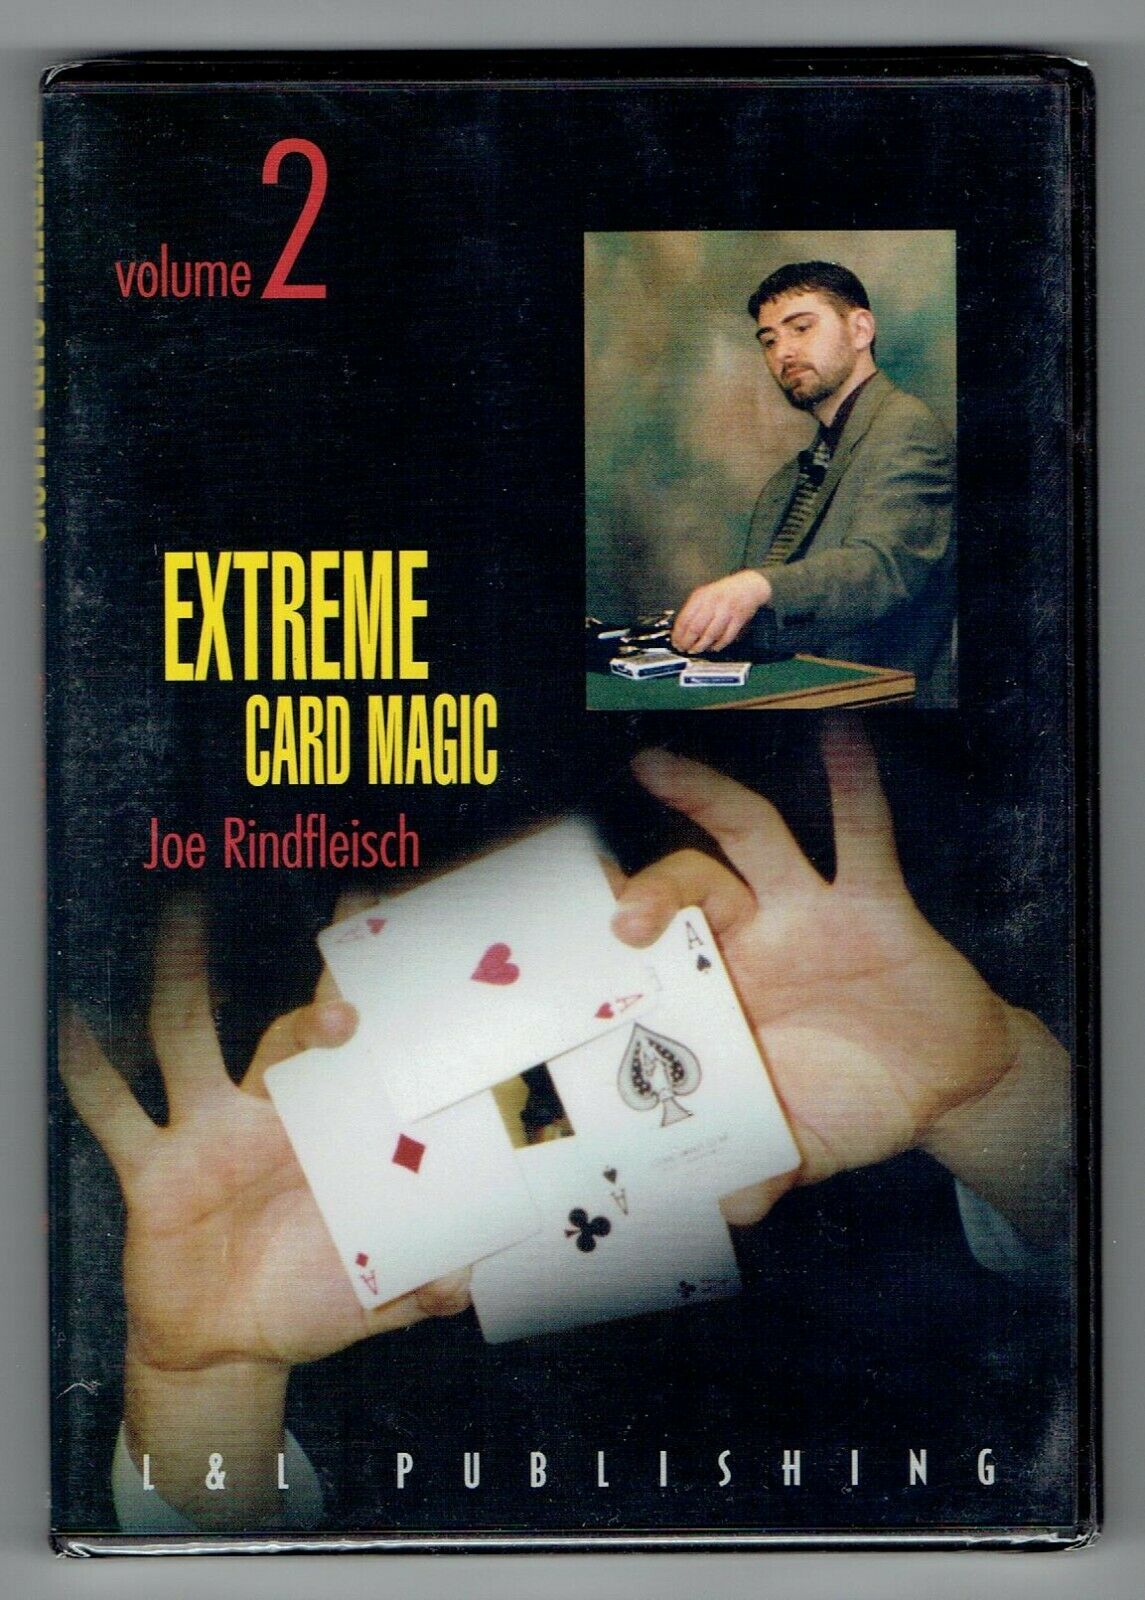 Clearance Sale - Extreme Card Magic Volume 2 By Joe Rindfleisch